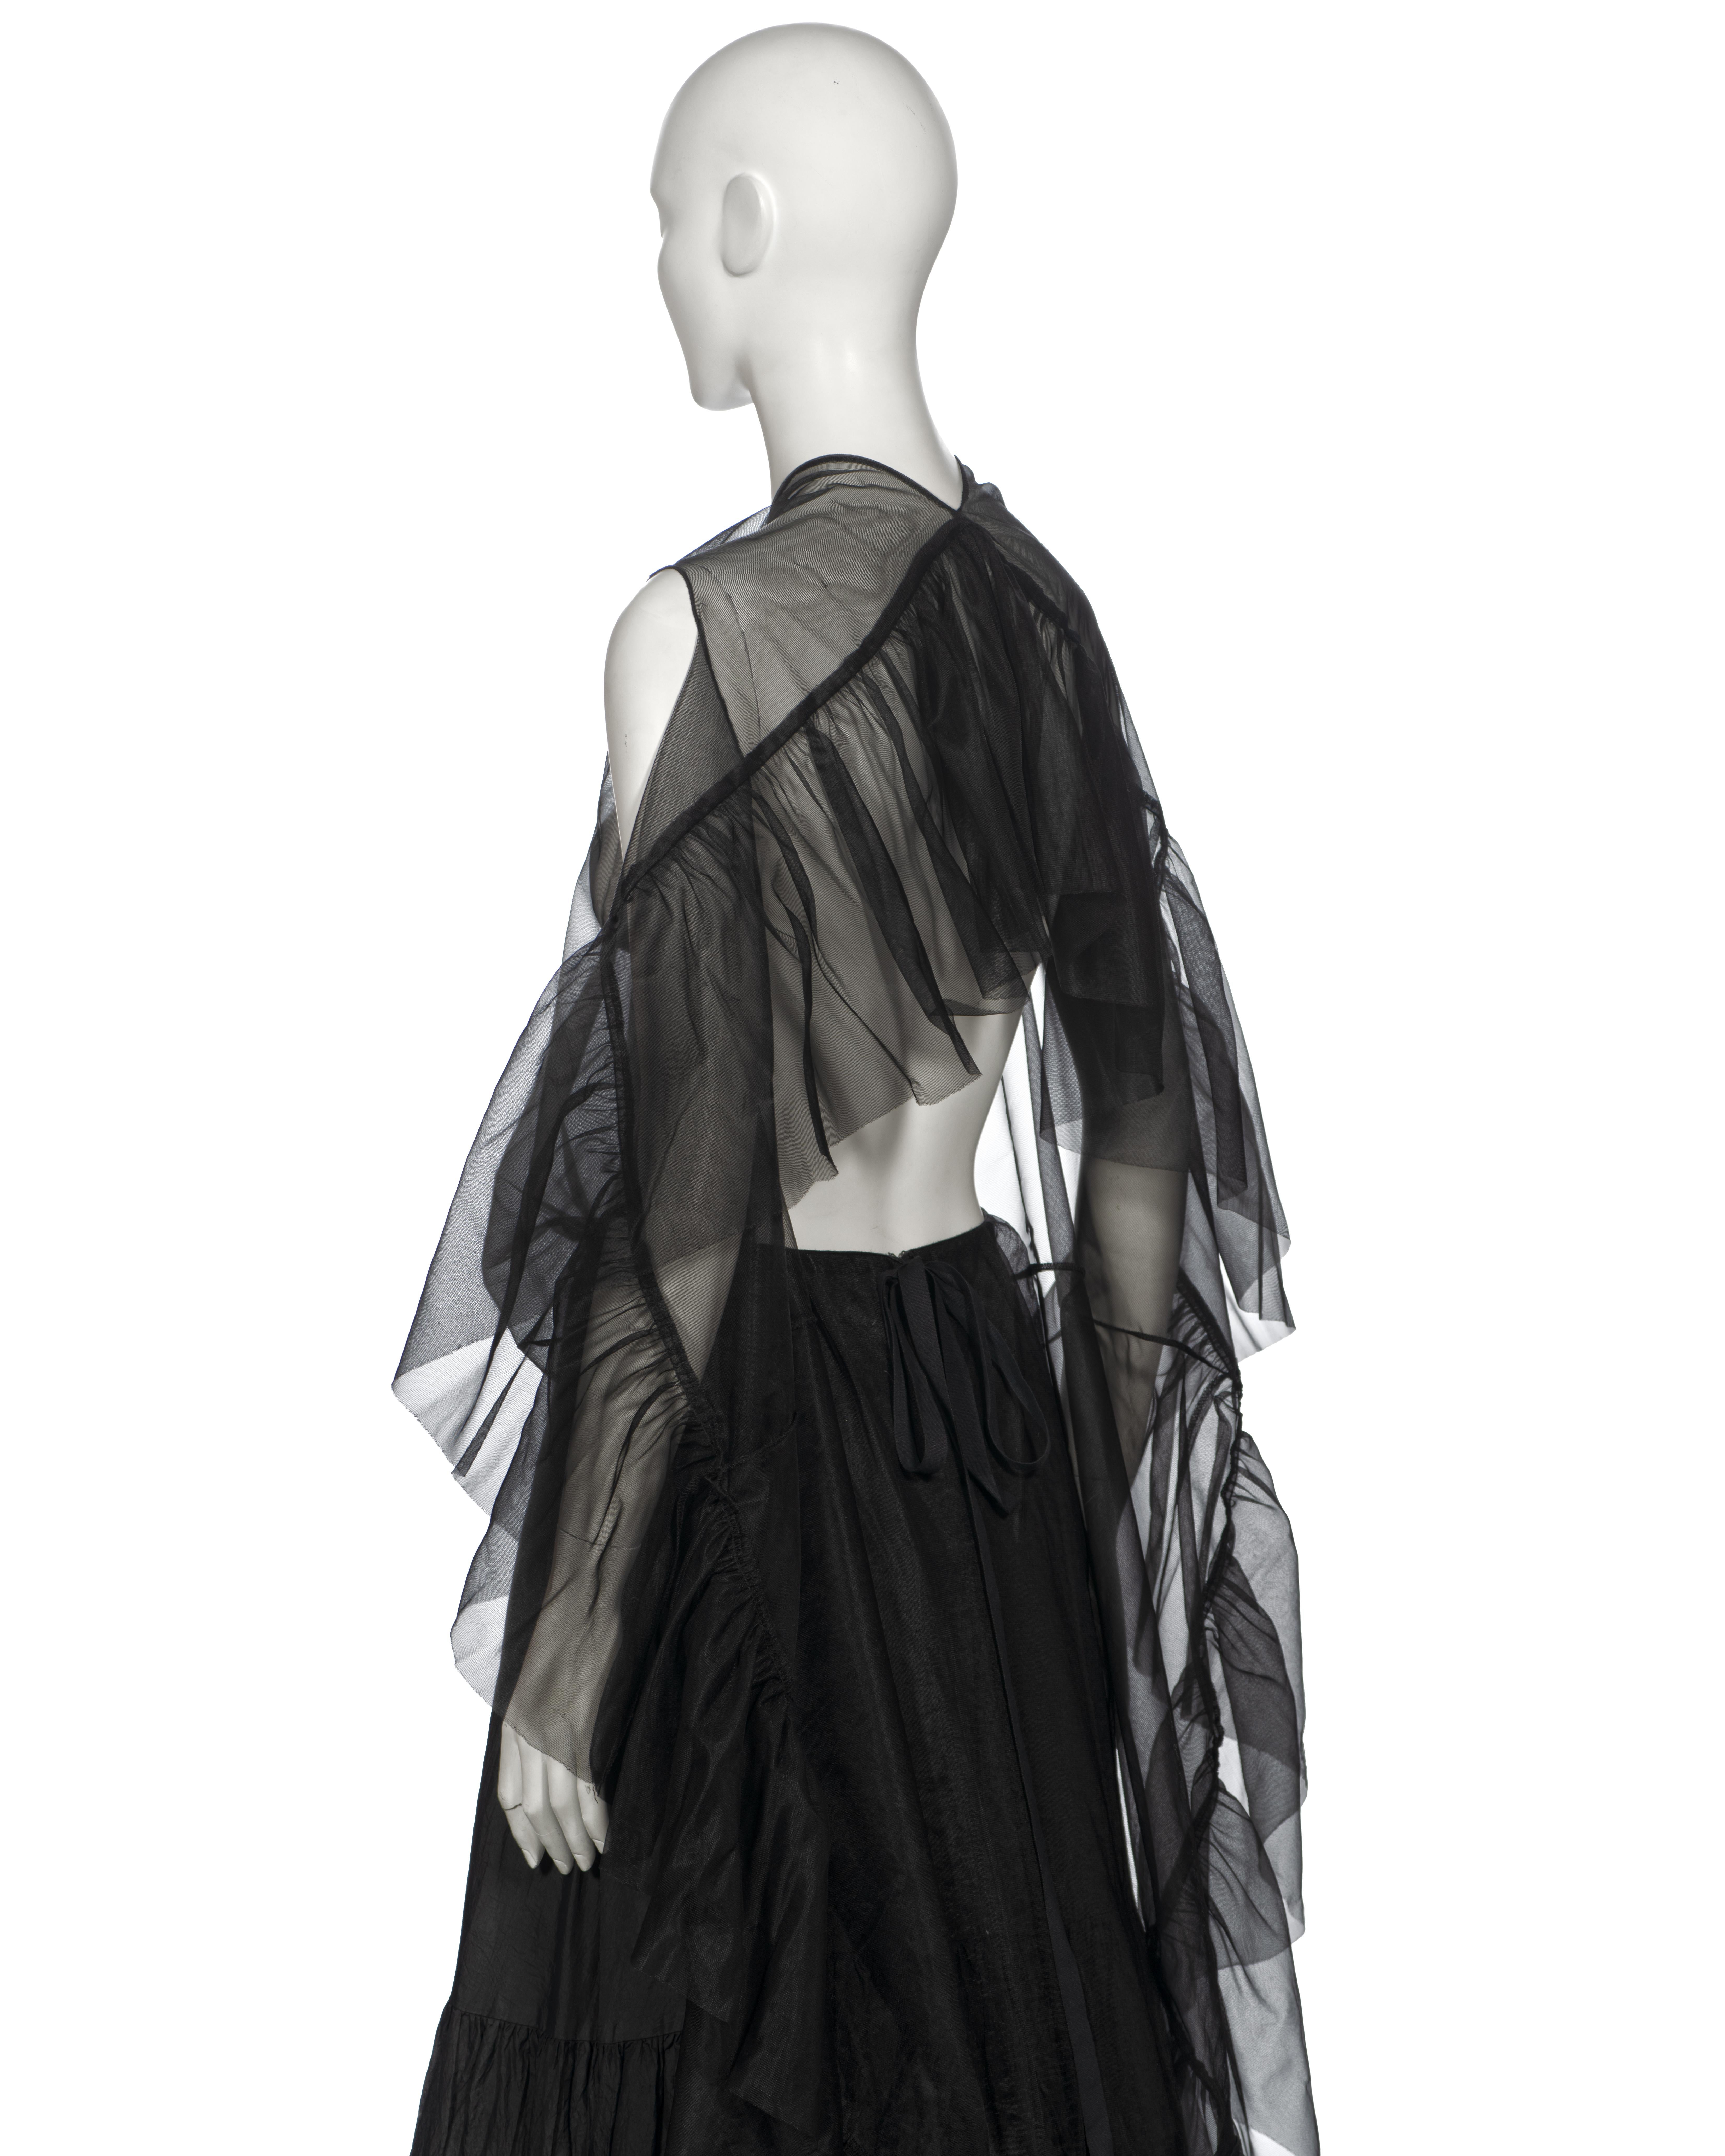 Martin Margiela Artisanal Evening Dress Made Out Of Vintage Petticoats, ss 2003 For Sale 7